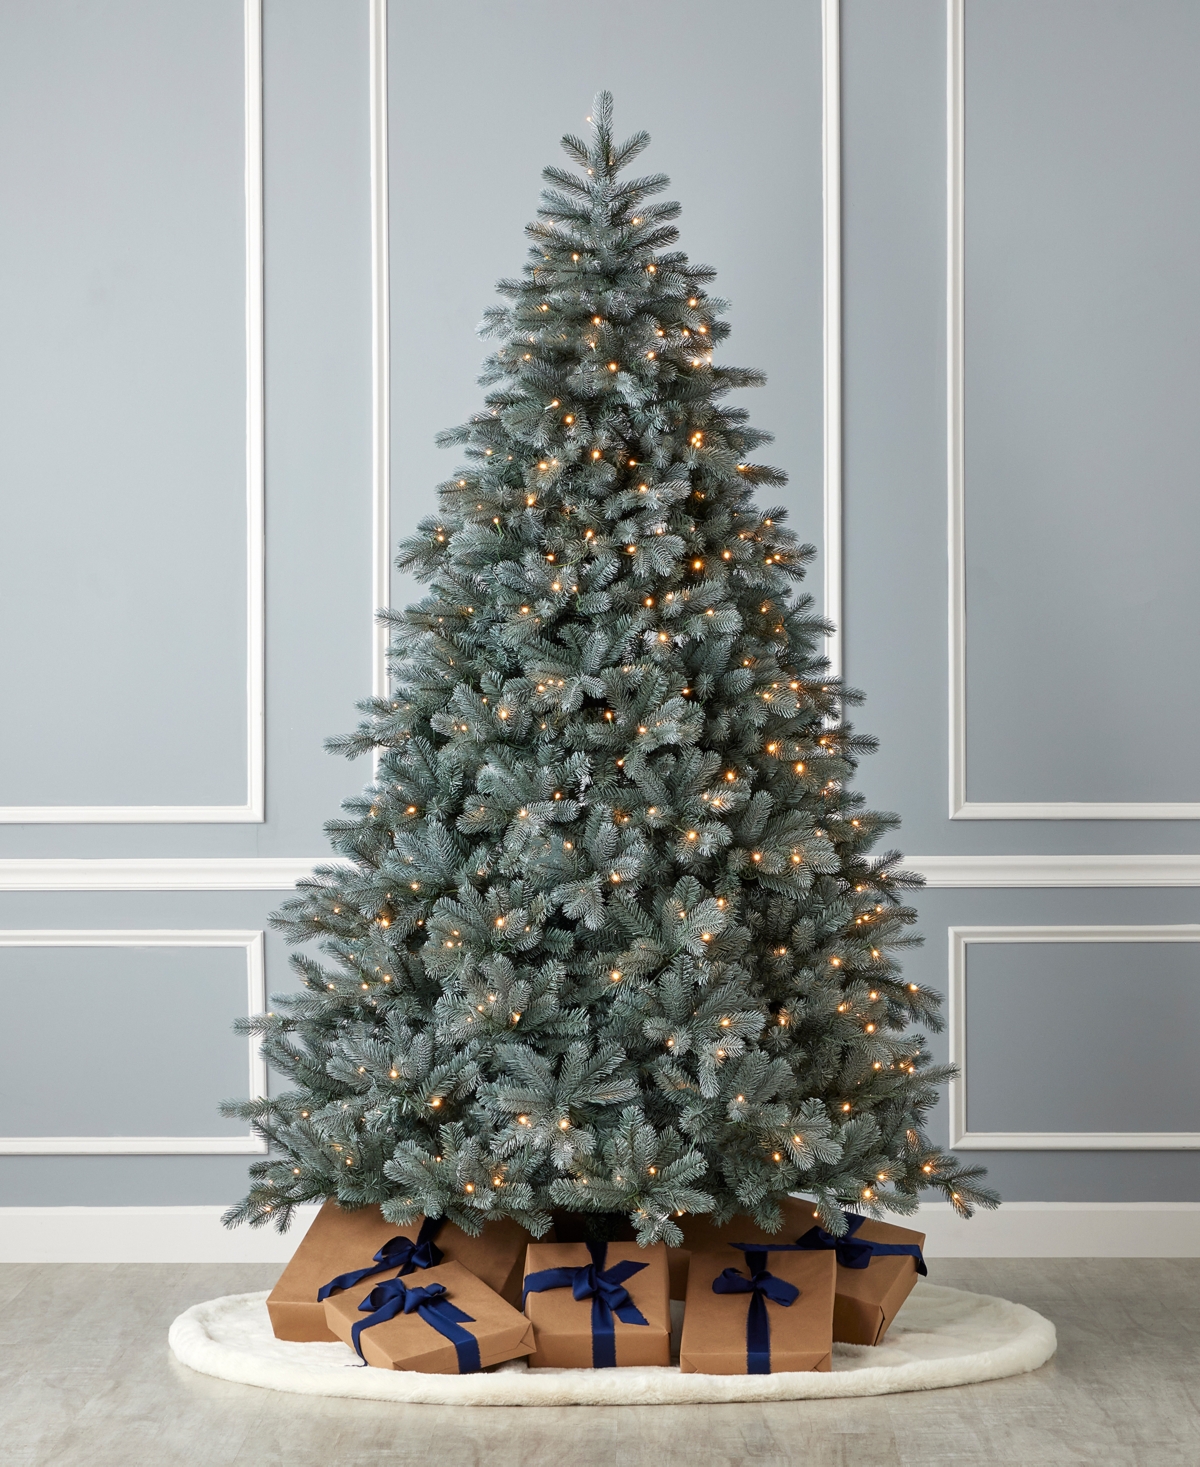 Spruce 9' Pre-Lit Pe Mixed Pvc Tree with Metal Stand, 3680 Tips, 700 Warm Led, Ez-Connect, Remote, Storage Bag - Blue